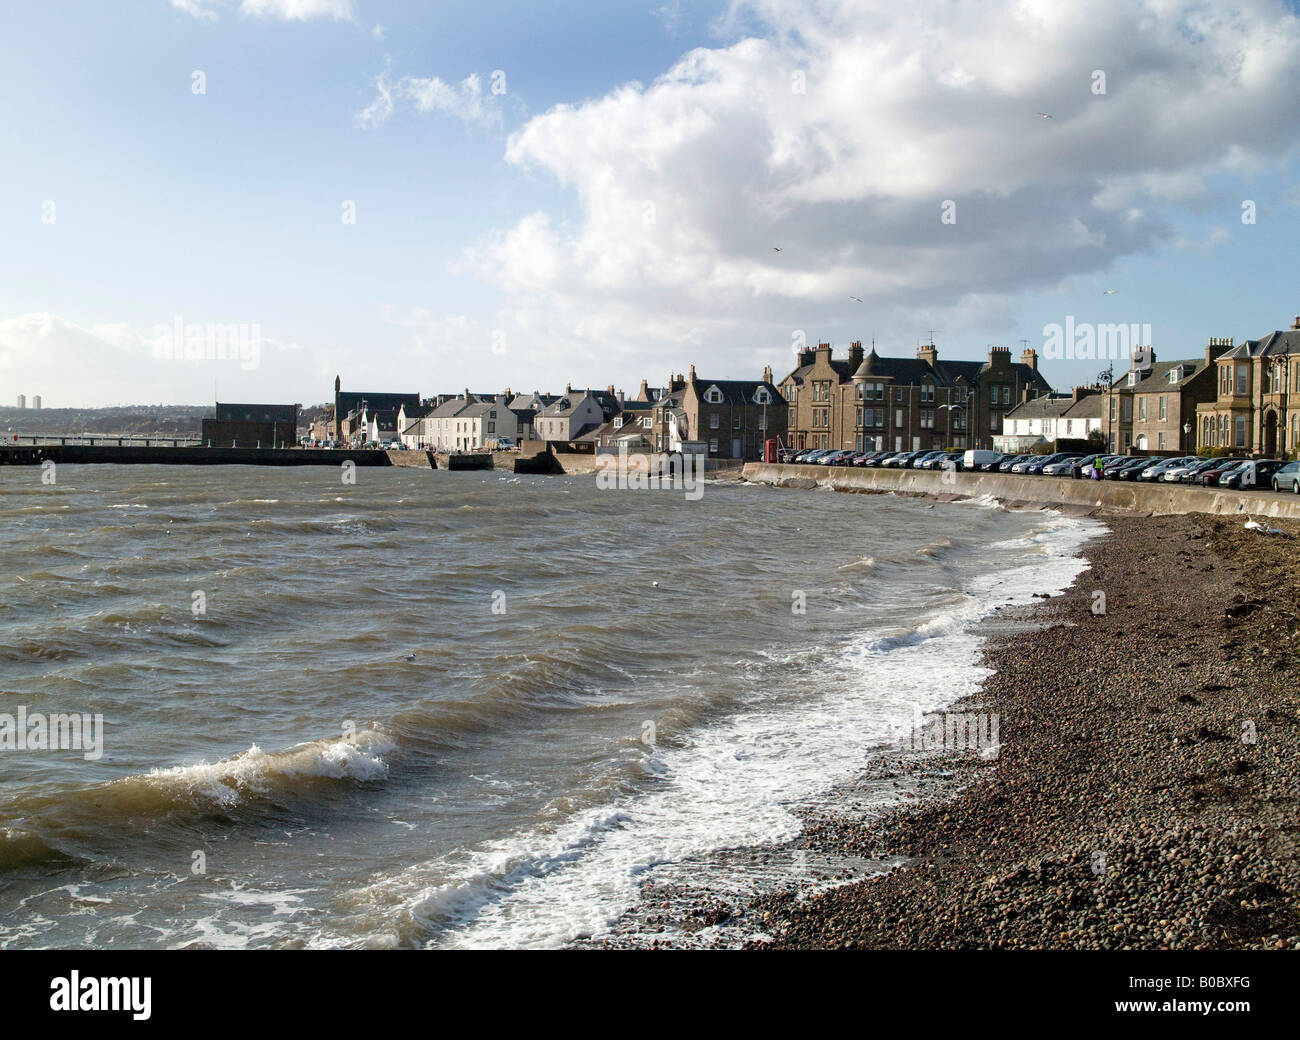 Broughty Ferry, Dundee, Tayside, Scotland Stock Photo